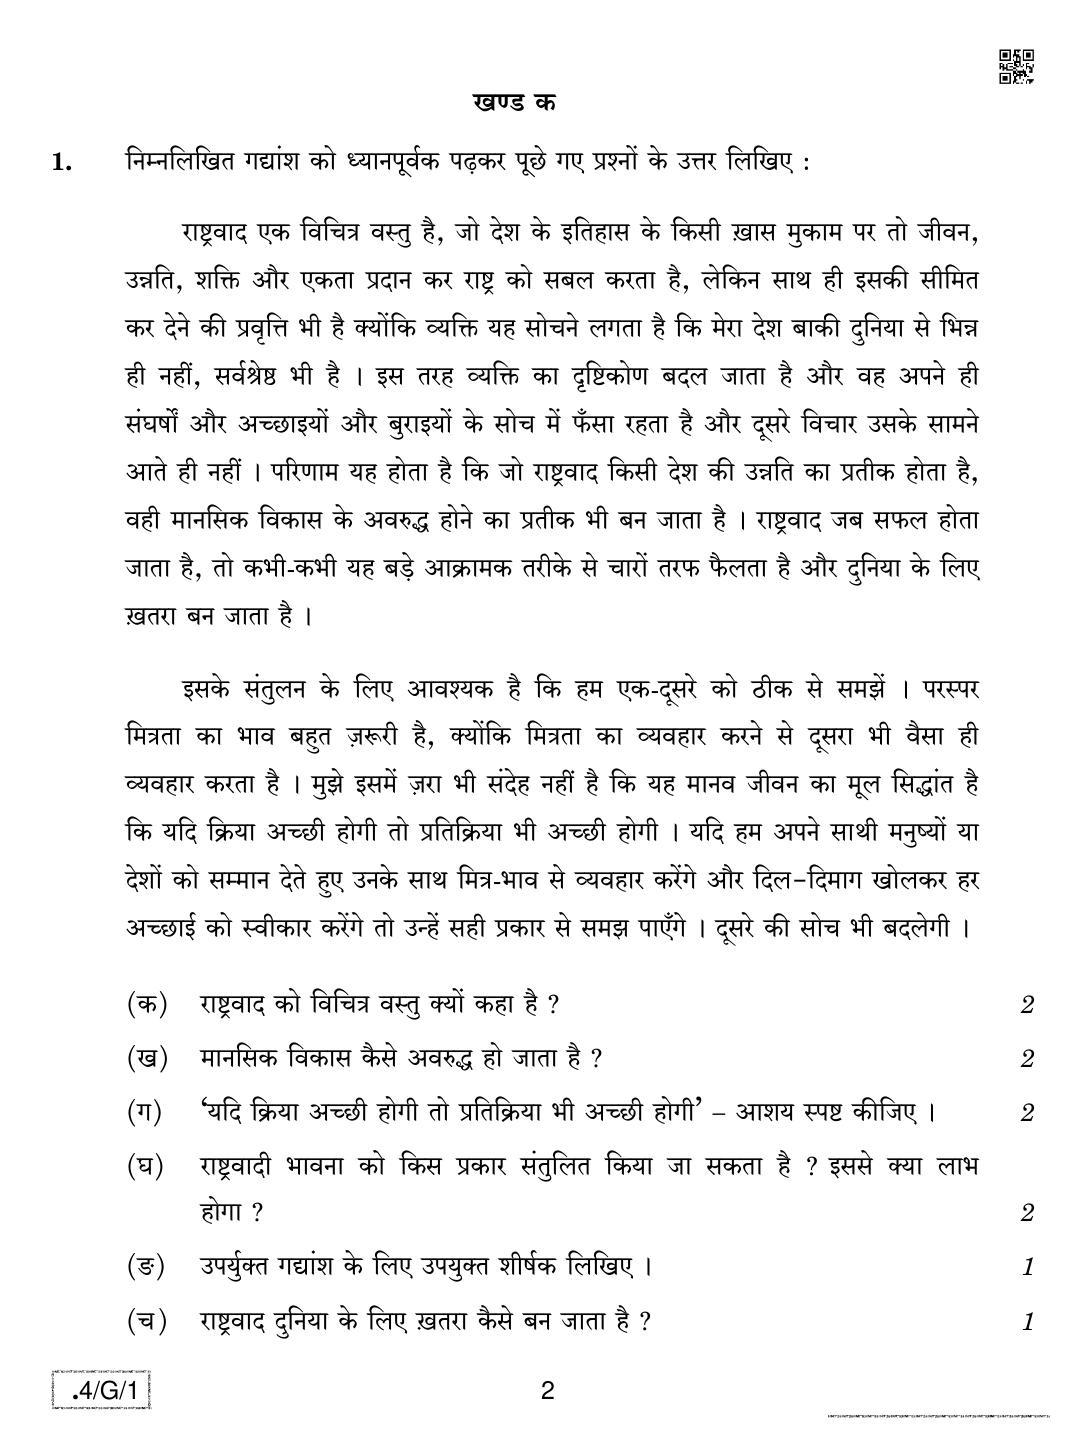 CBSE Class 10 4-C-1 Hindi B 2020 Compartment Question Paper - Page 2